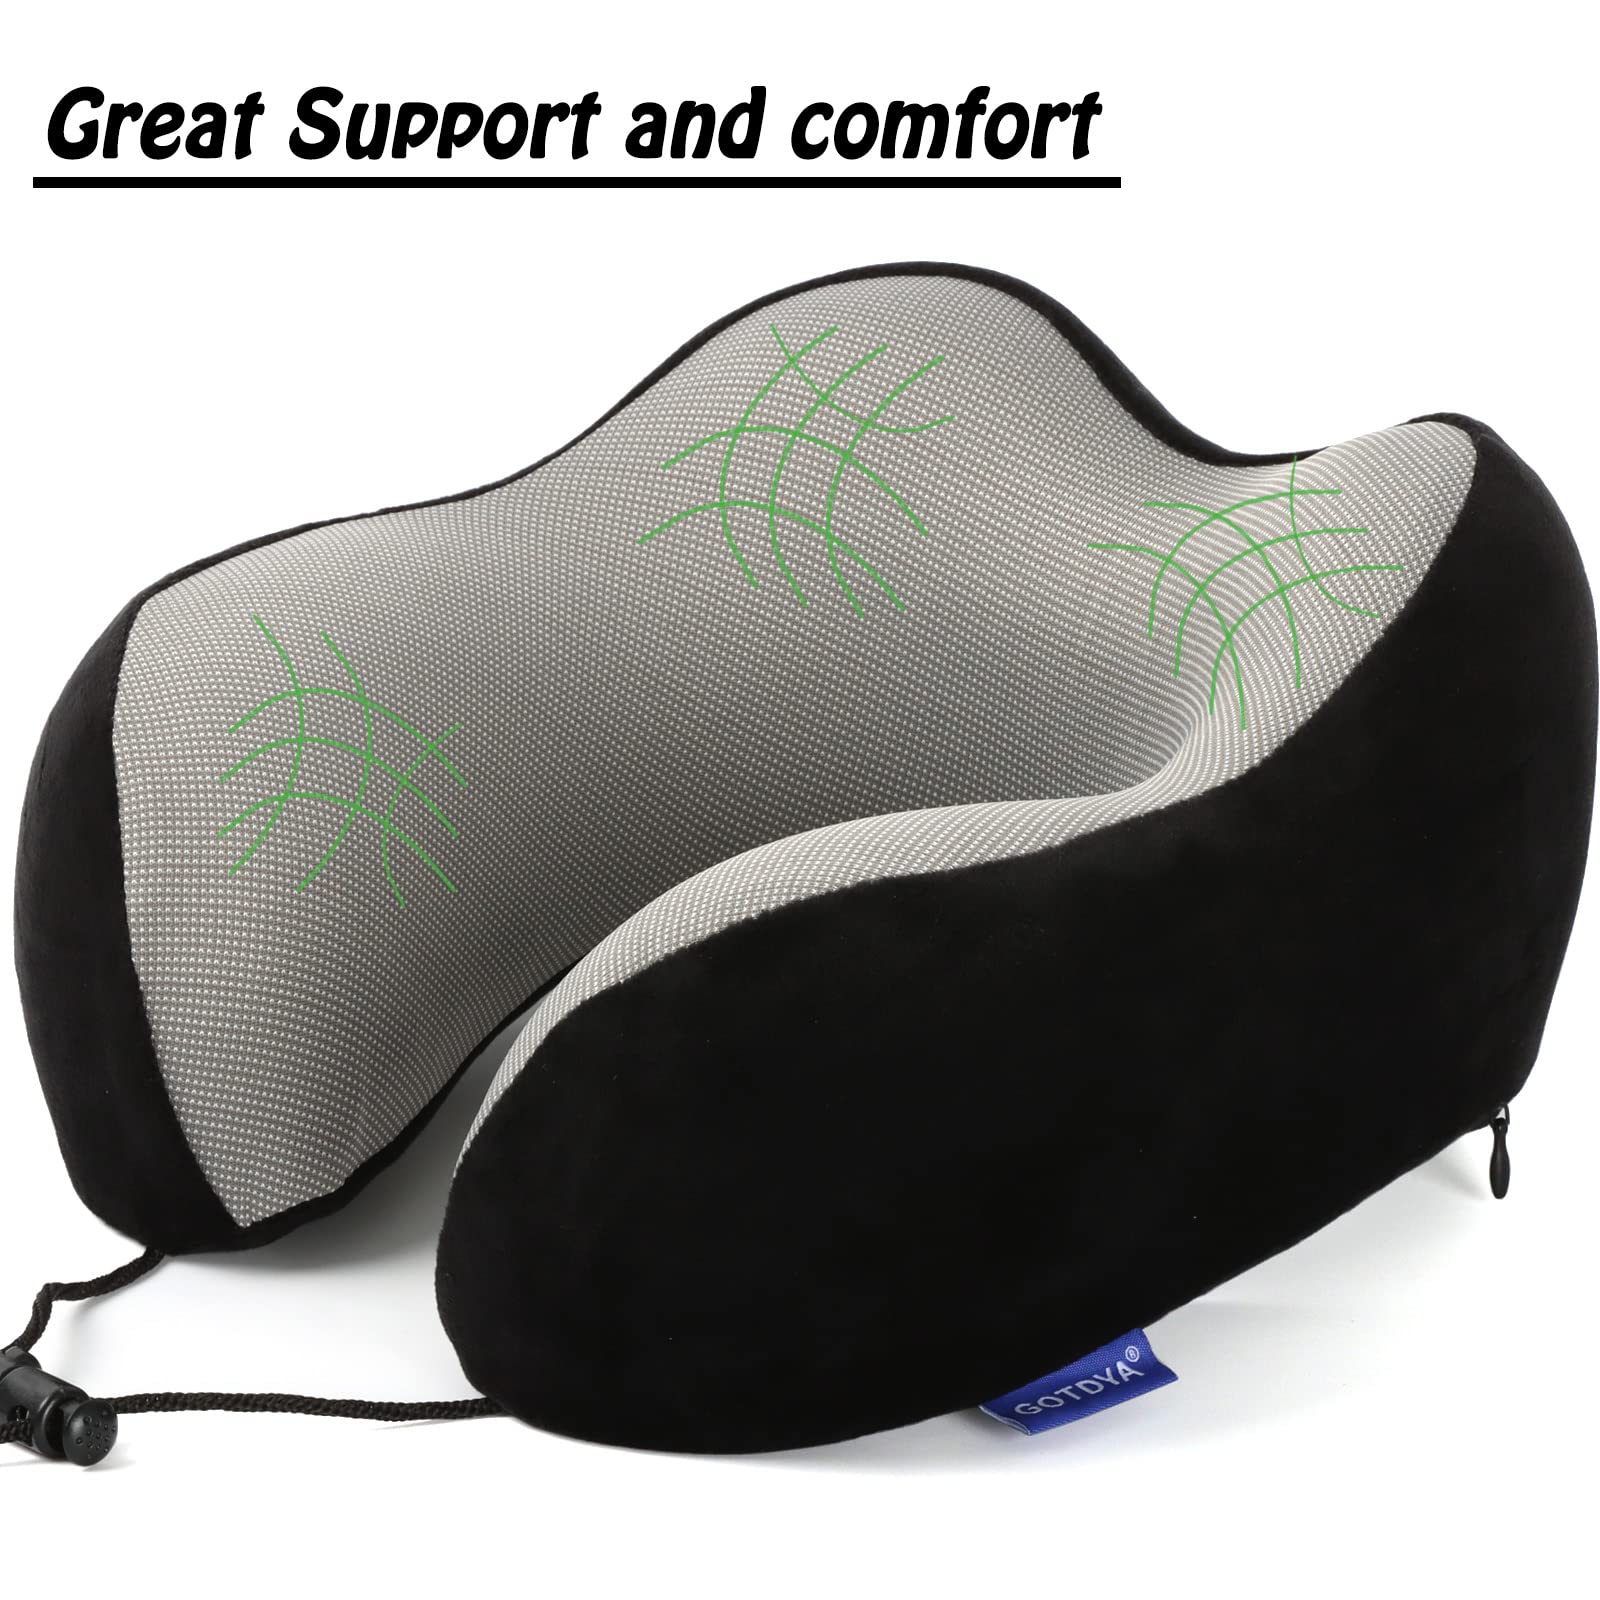 GOTDYA Travel Pillow,Travel Neck Pillows for Sleeping,100% Pure Memory Foam Soft Comfort & Support Pillow for Airplane/Car/Office&Home Rest Use-Black